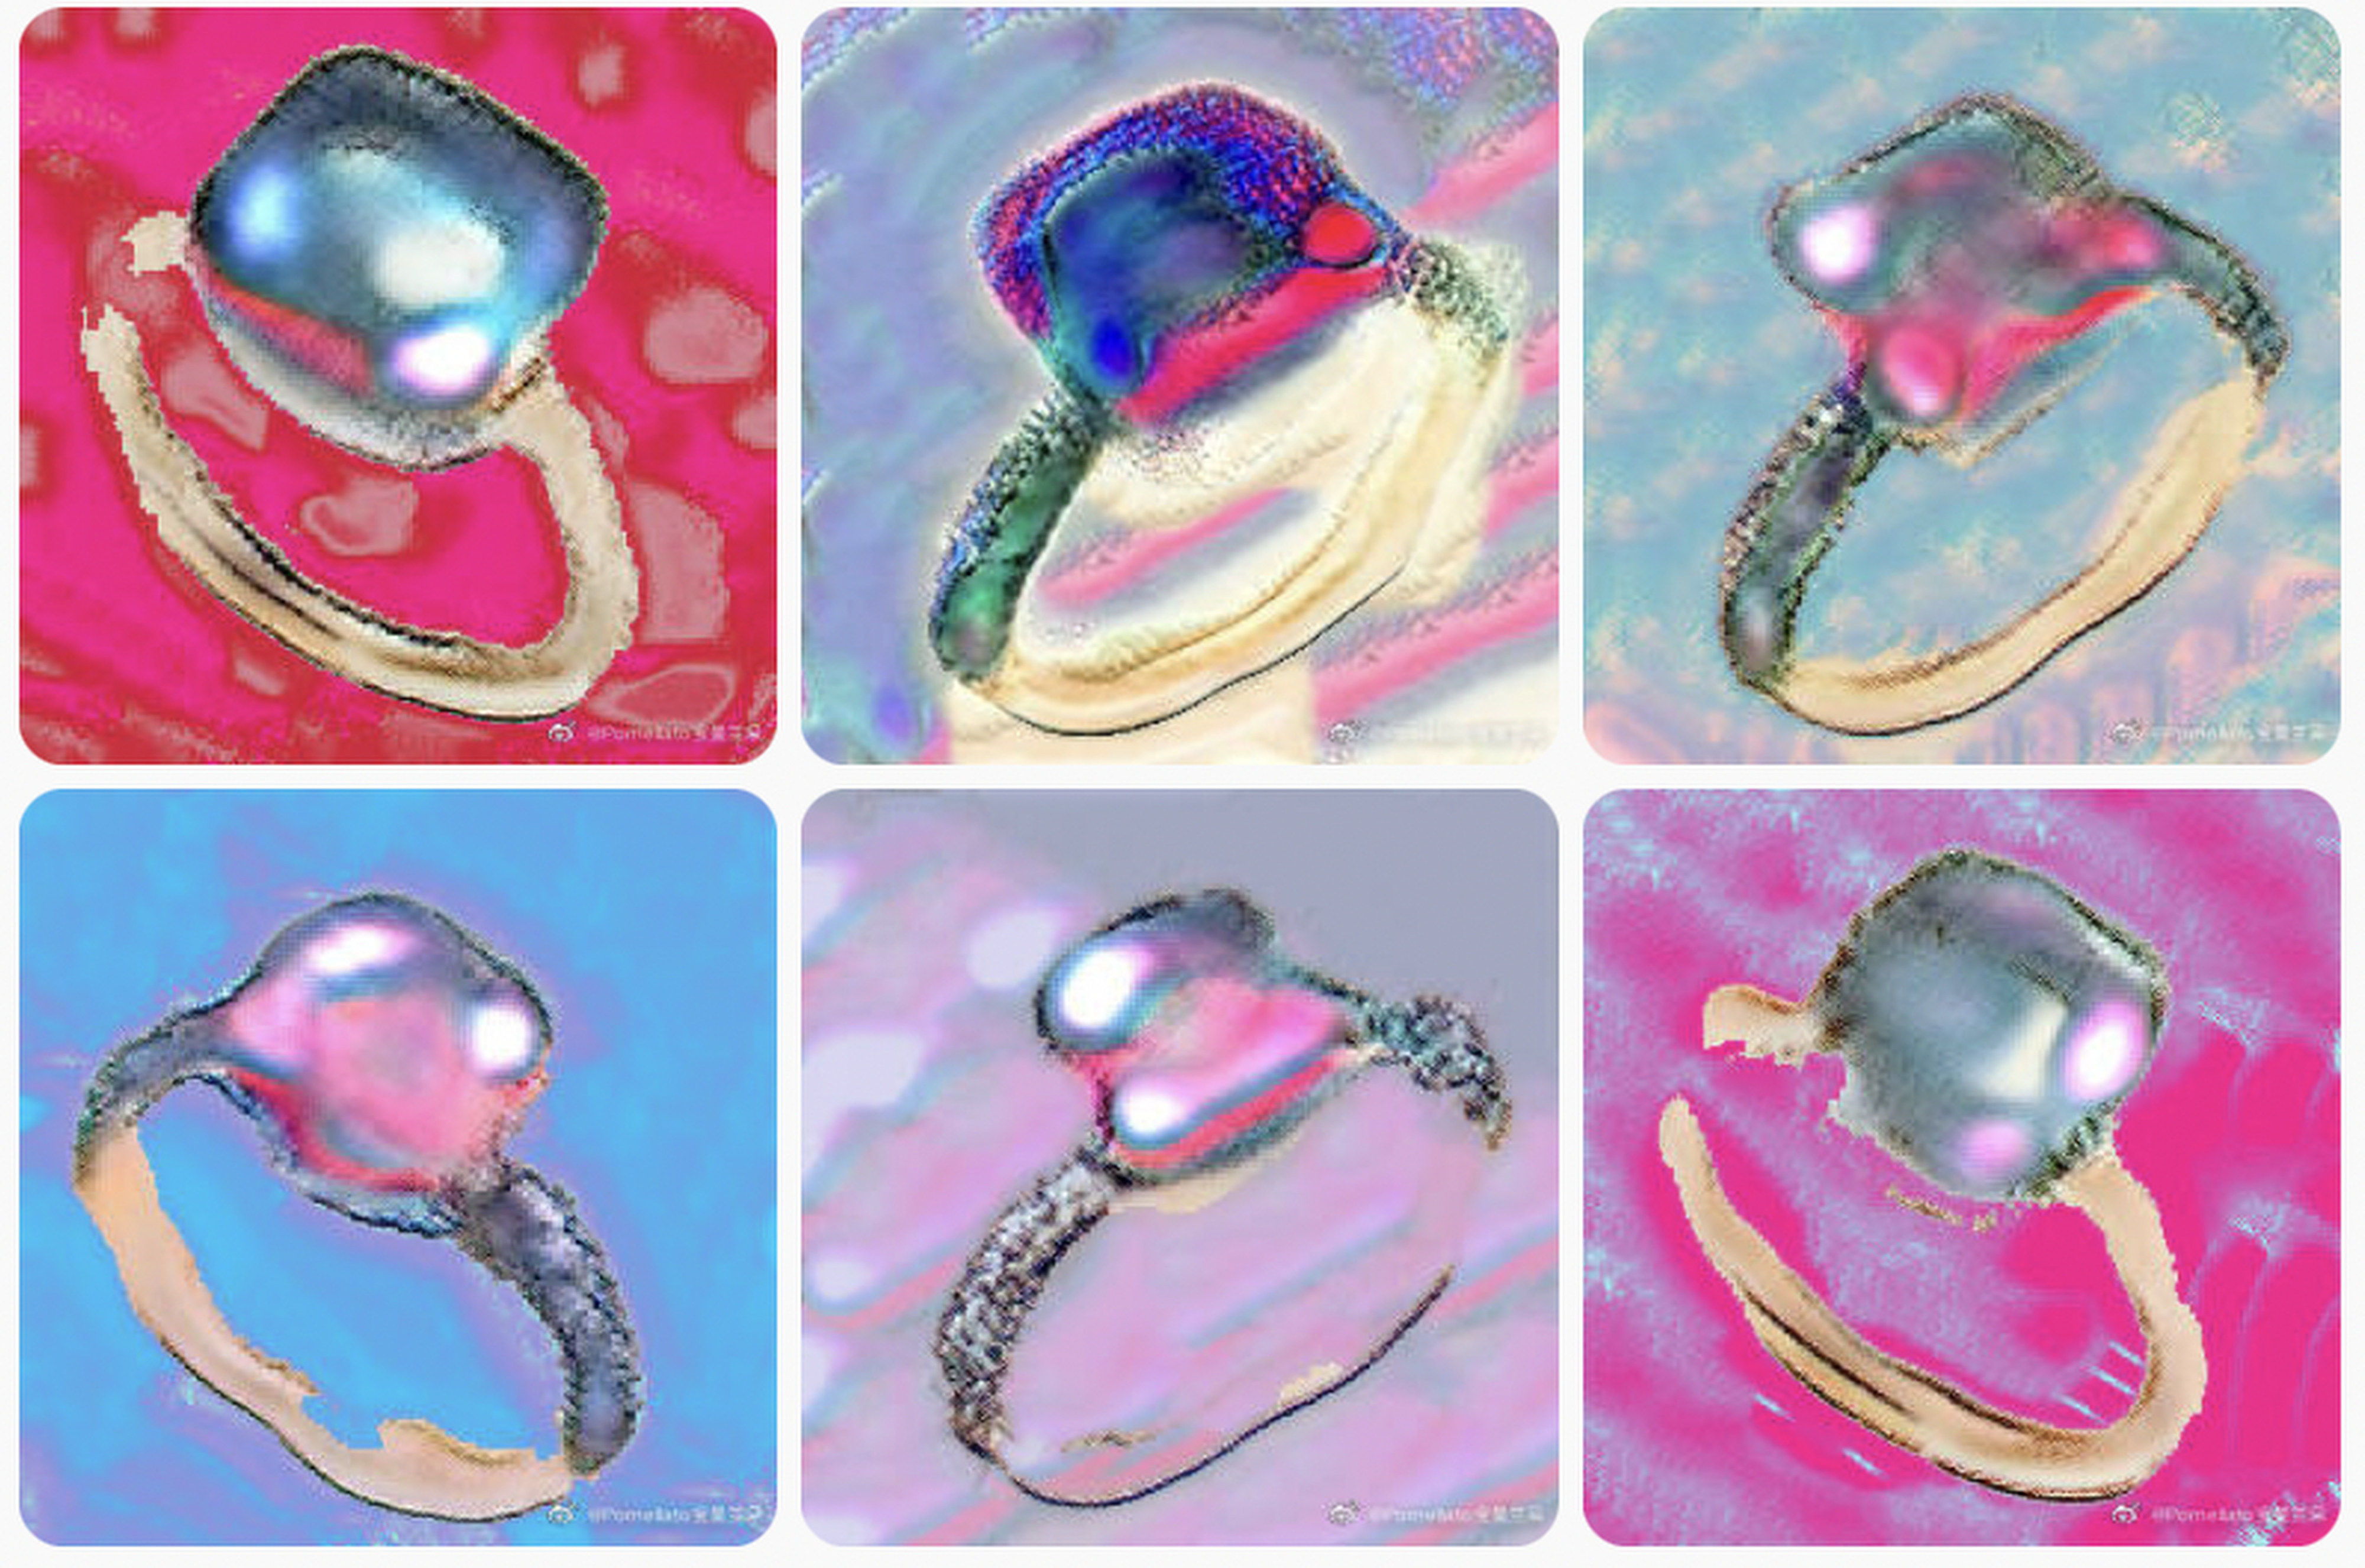 Kering-owned Italian jewellery brand Pomellato commissioned crypto artist Sun Bohan to develop an NFT series based on the jewellery collection Nudo, and issued digital collectibles via Weibo’s digital collectible platform Top Holder in July. Photo: Pomellato’s Weibo